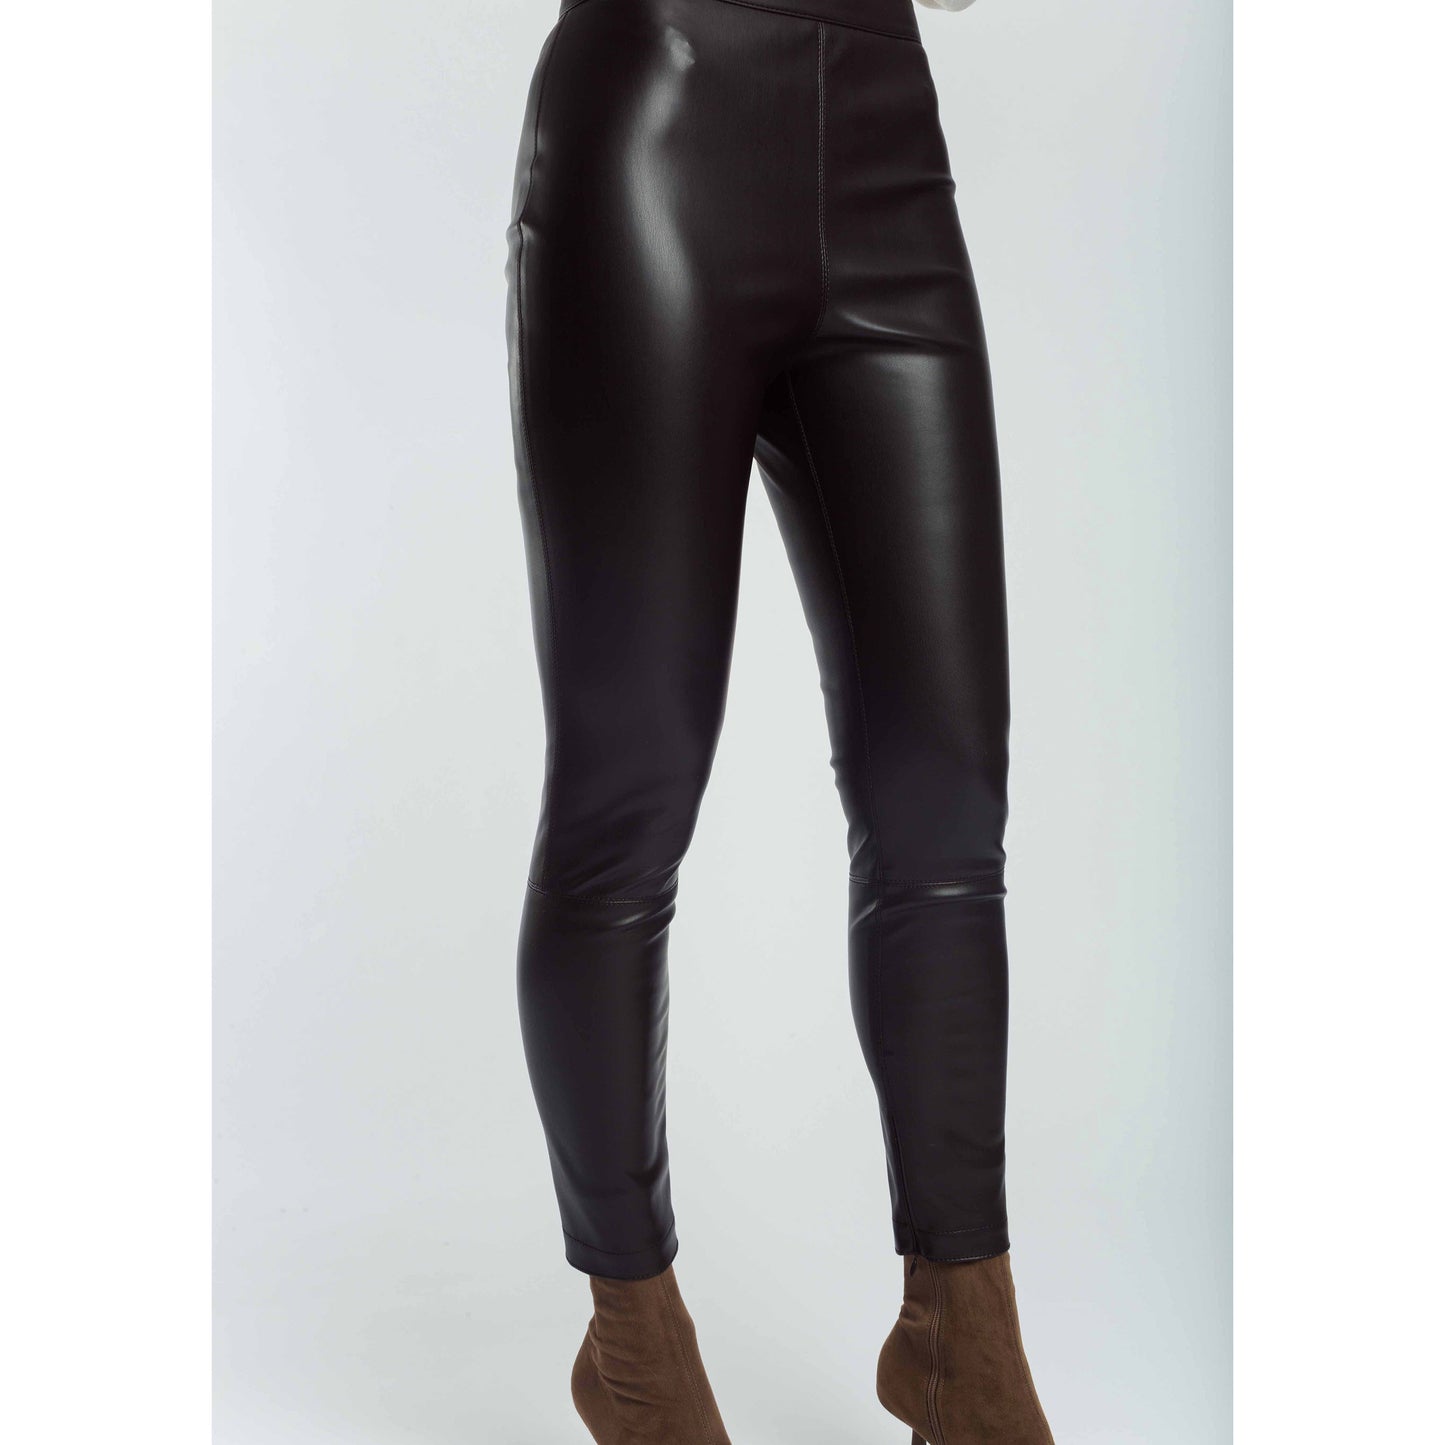 Brown leatherette pants